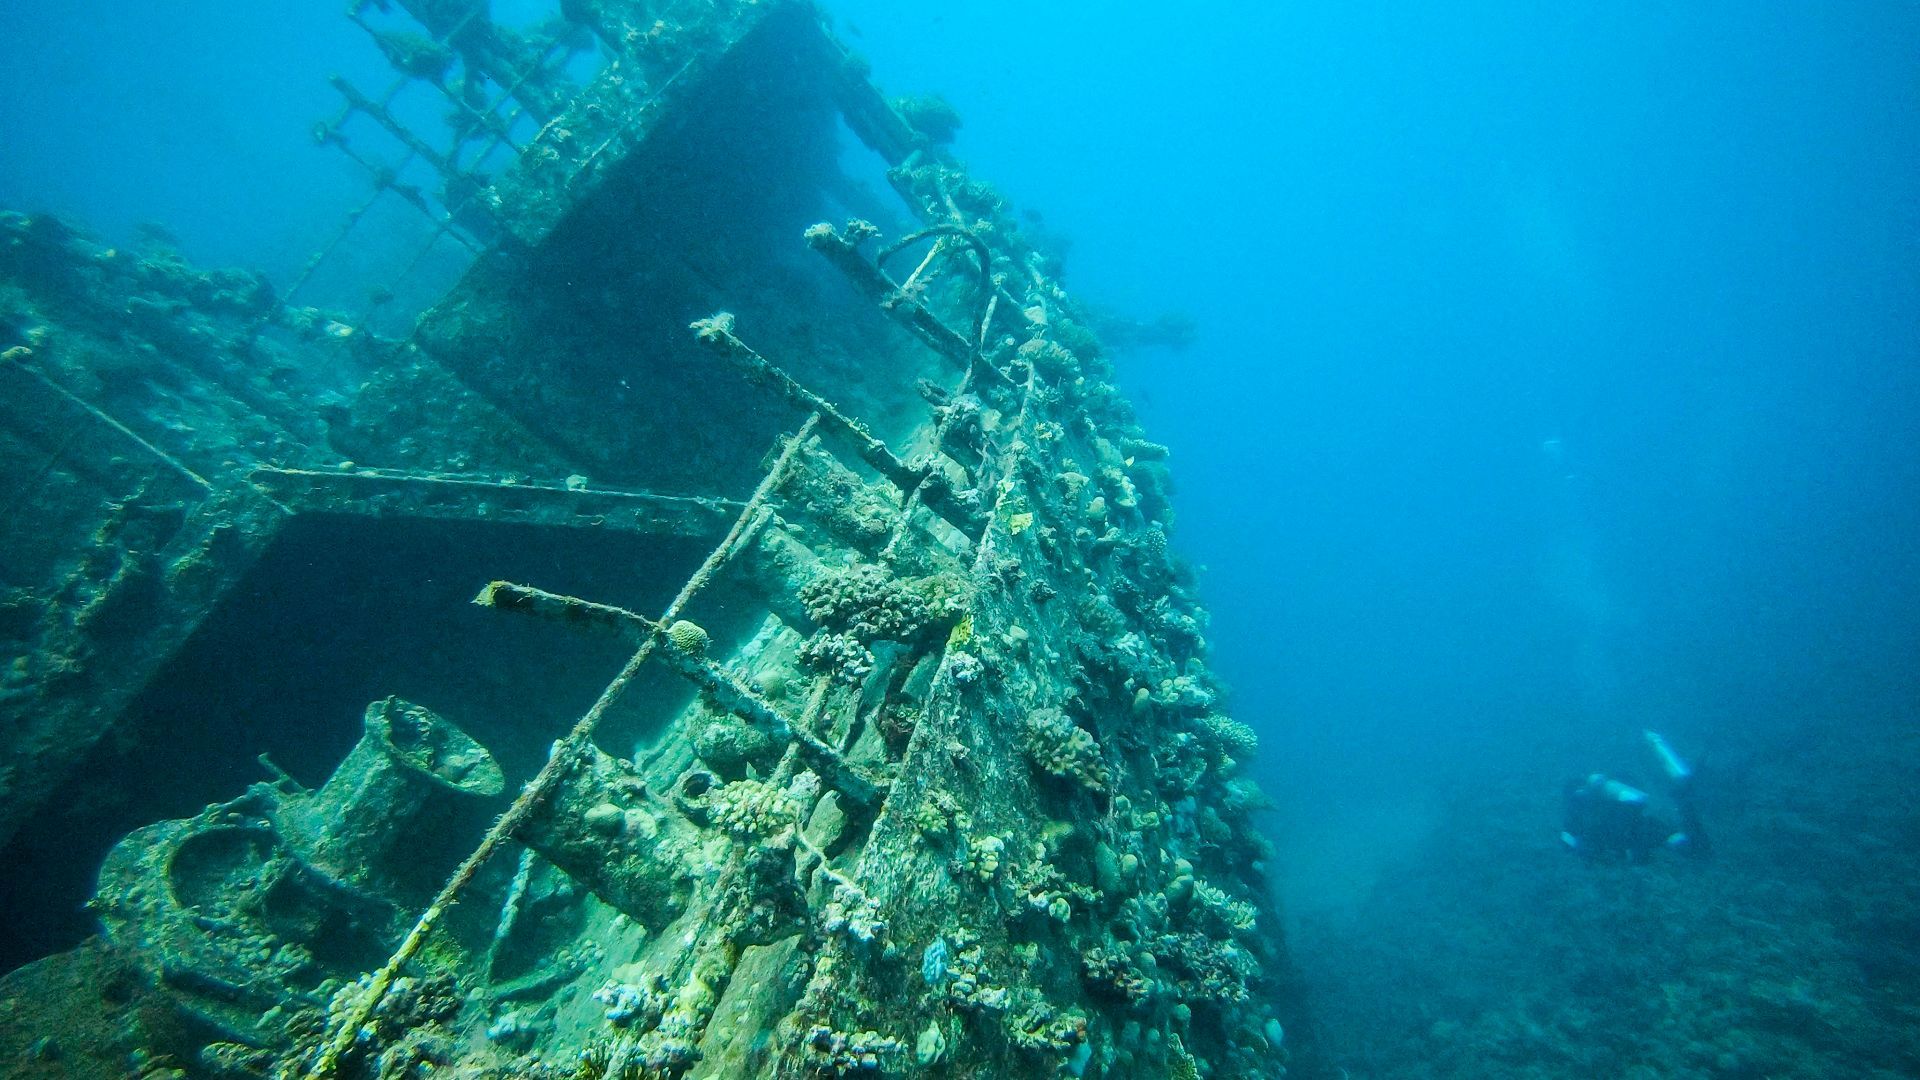  Diving in the Red Sea: Exploring the Hidden Wonders - Famous shipwrecks to explore in the Red Sea